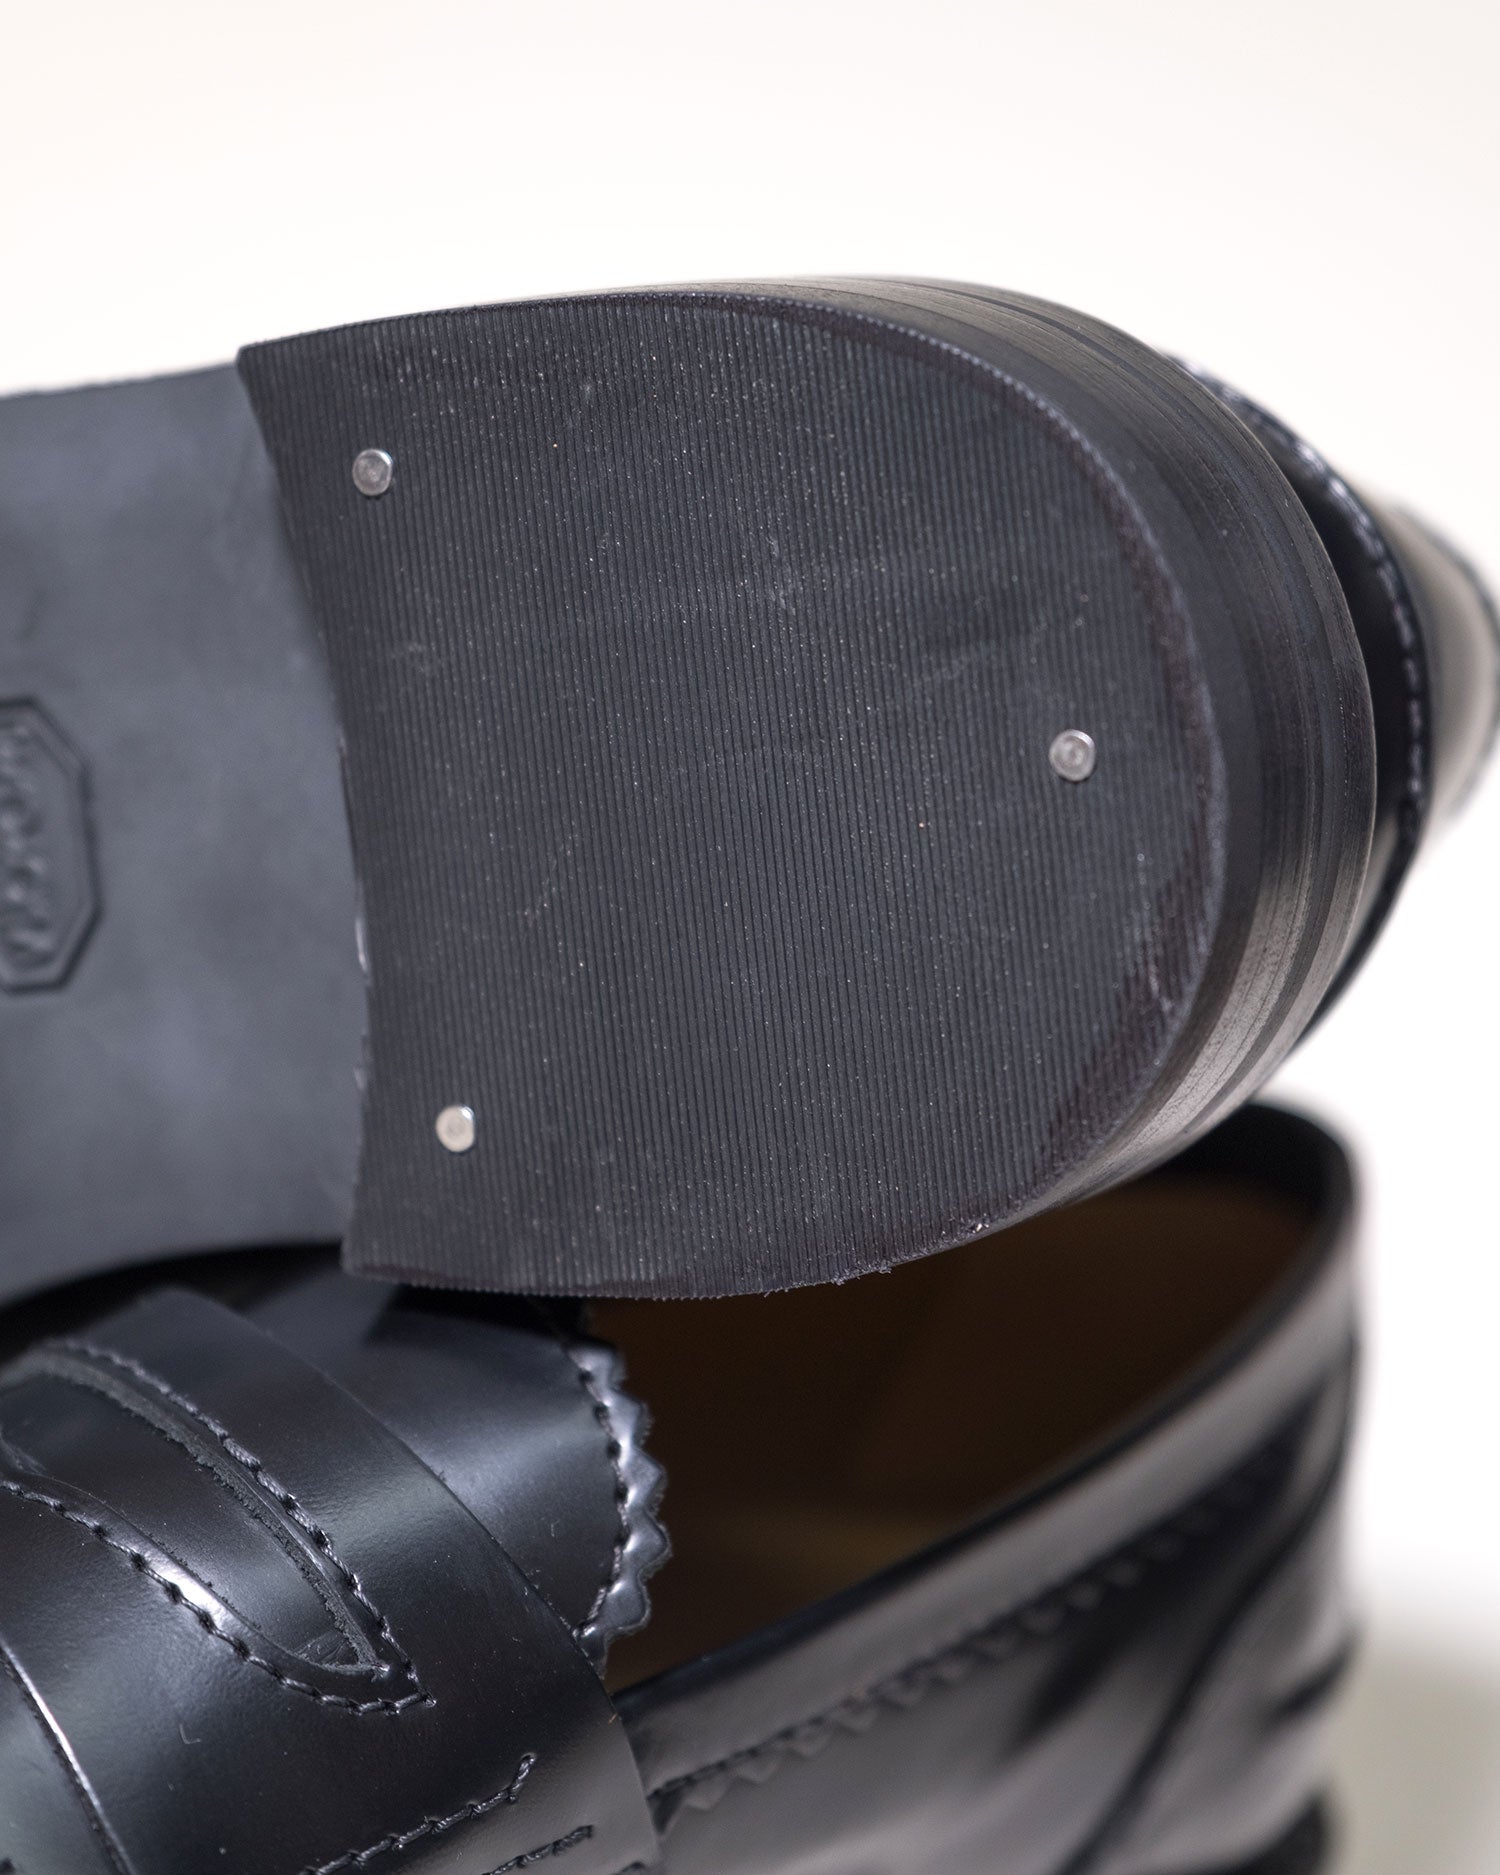 Our Legacy Loafer Black